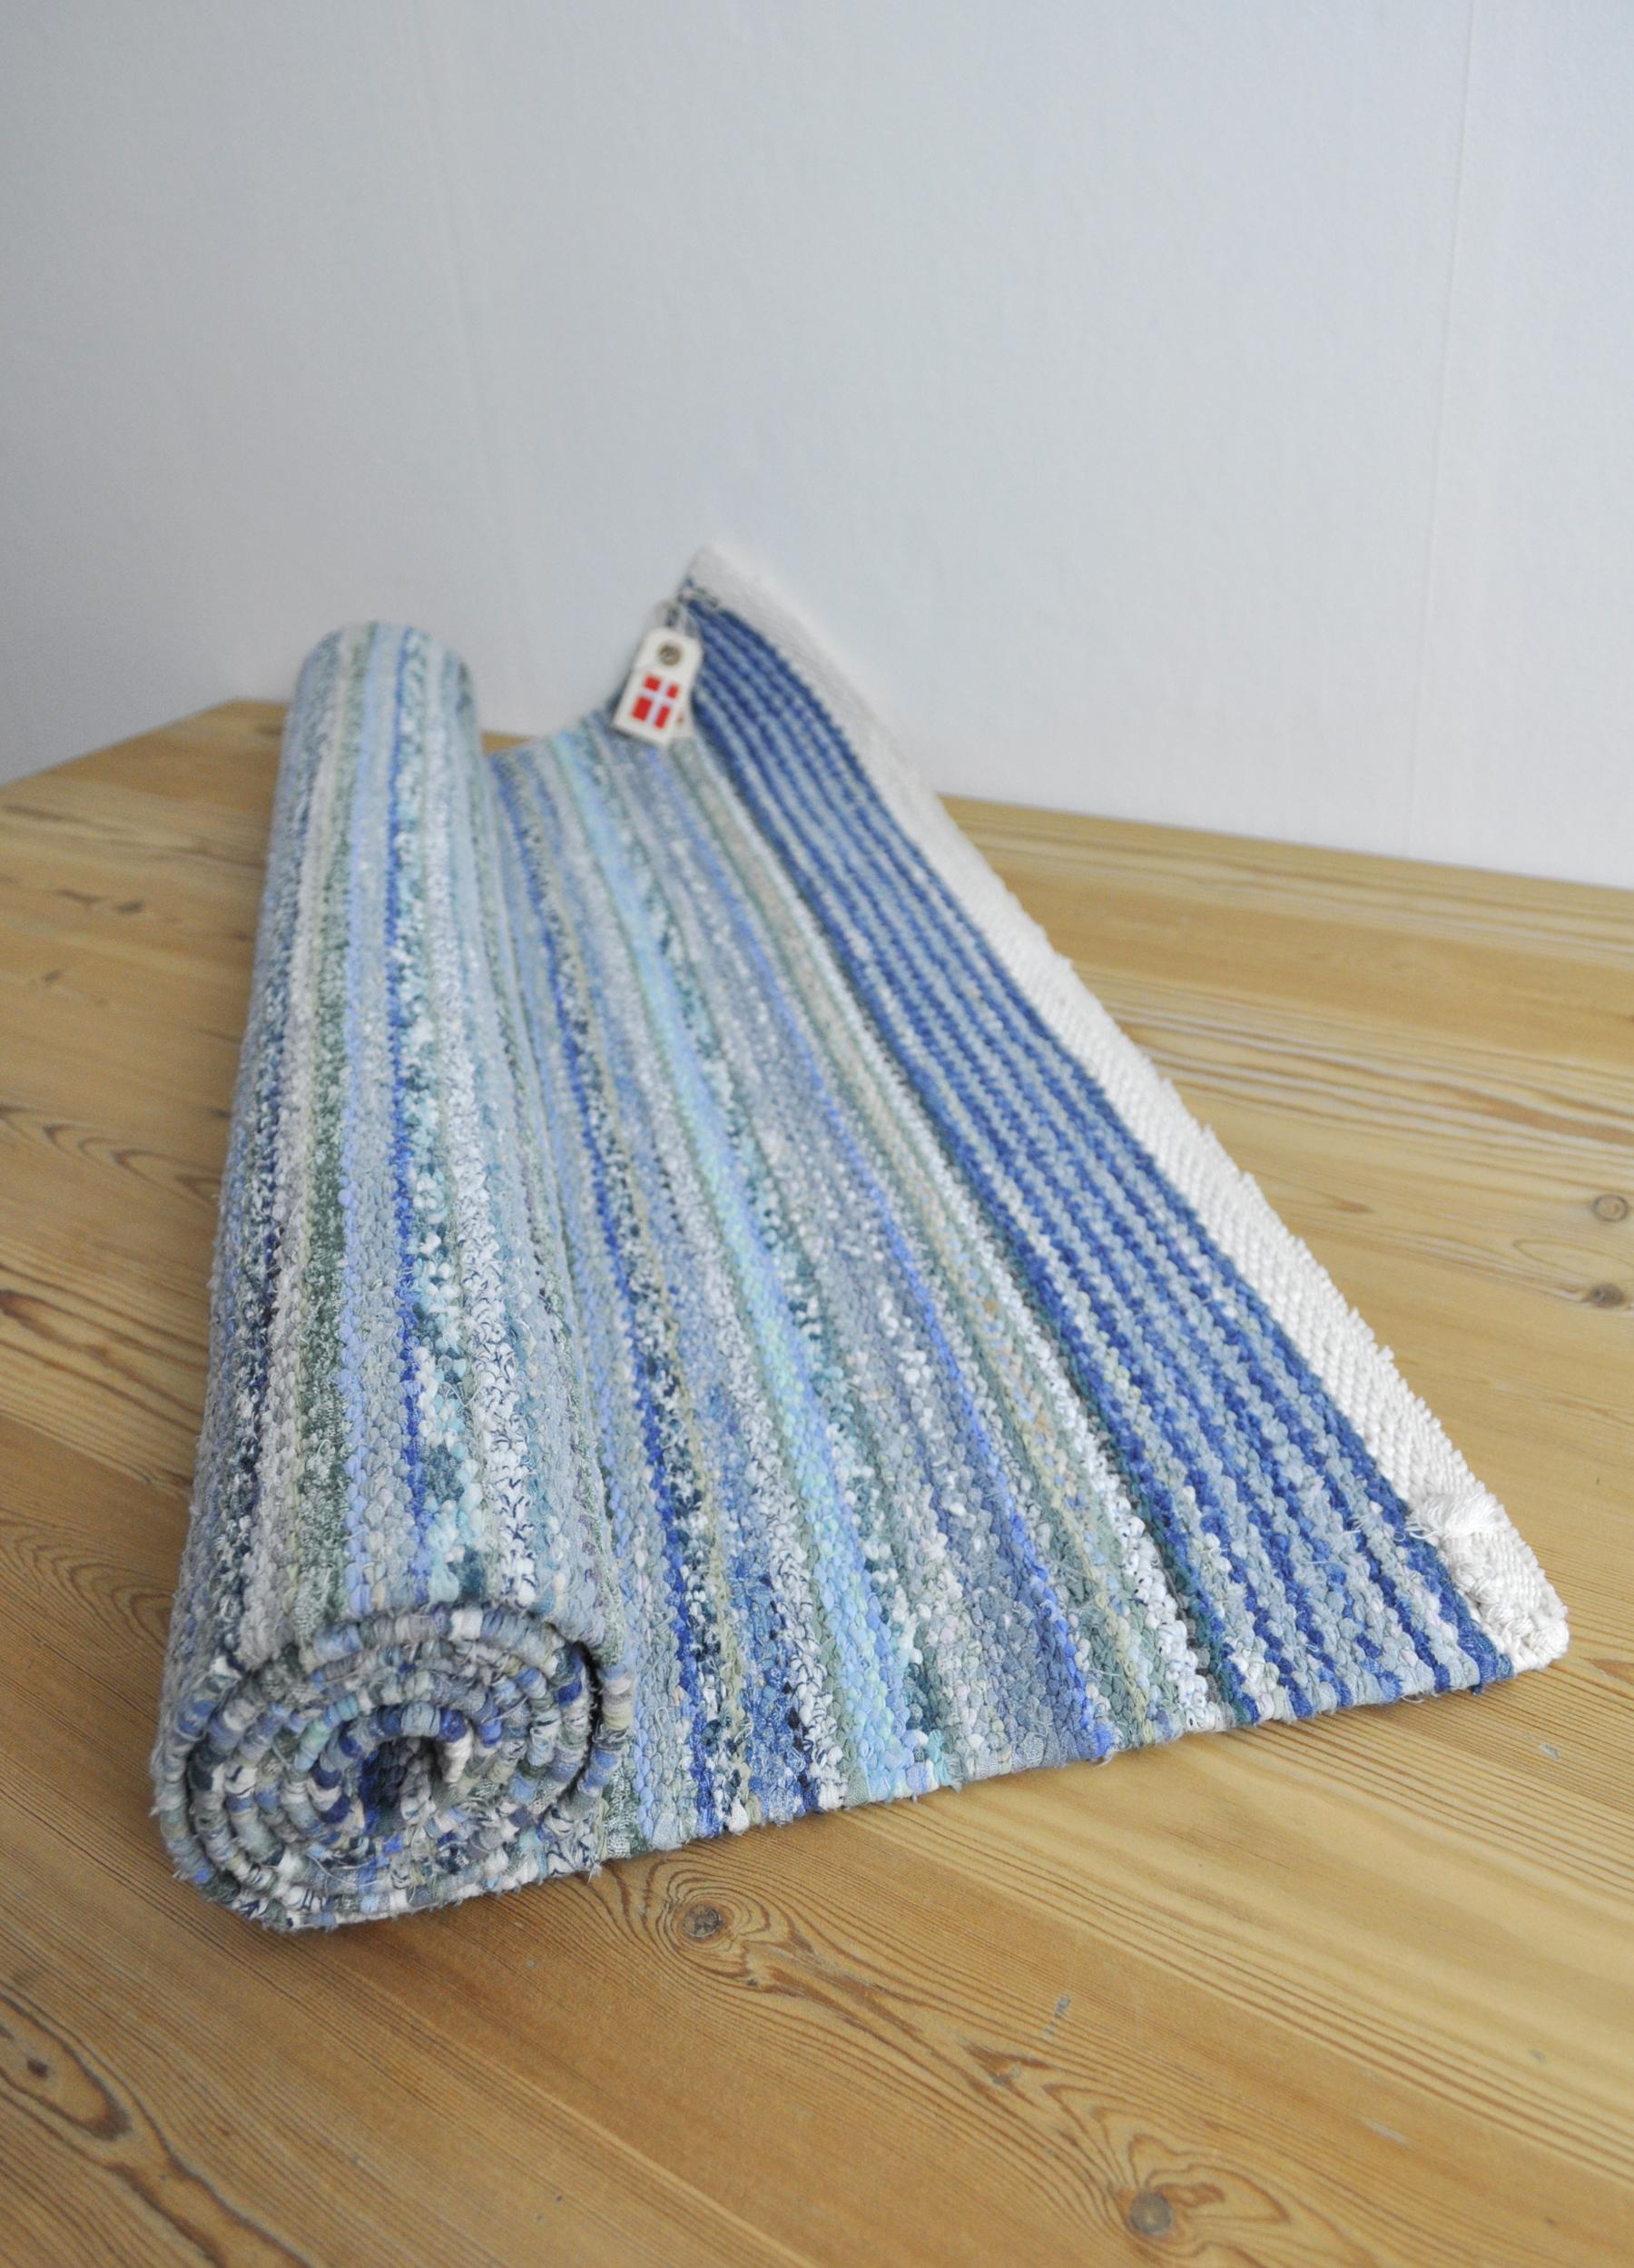 Contemporary Unique Handwoven Danish Rug in Recycled Materials 2